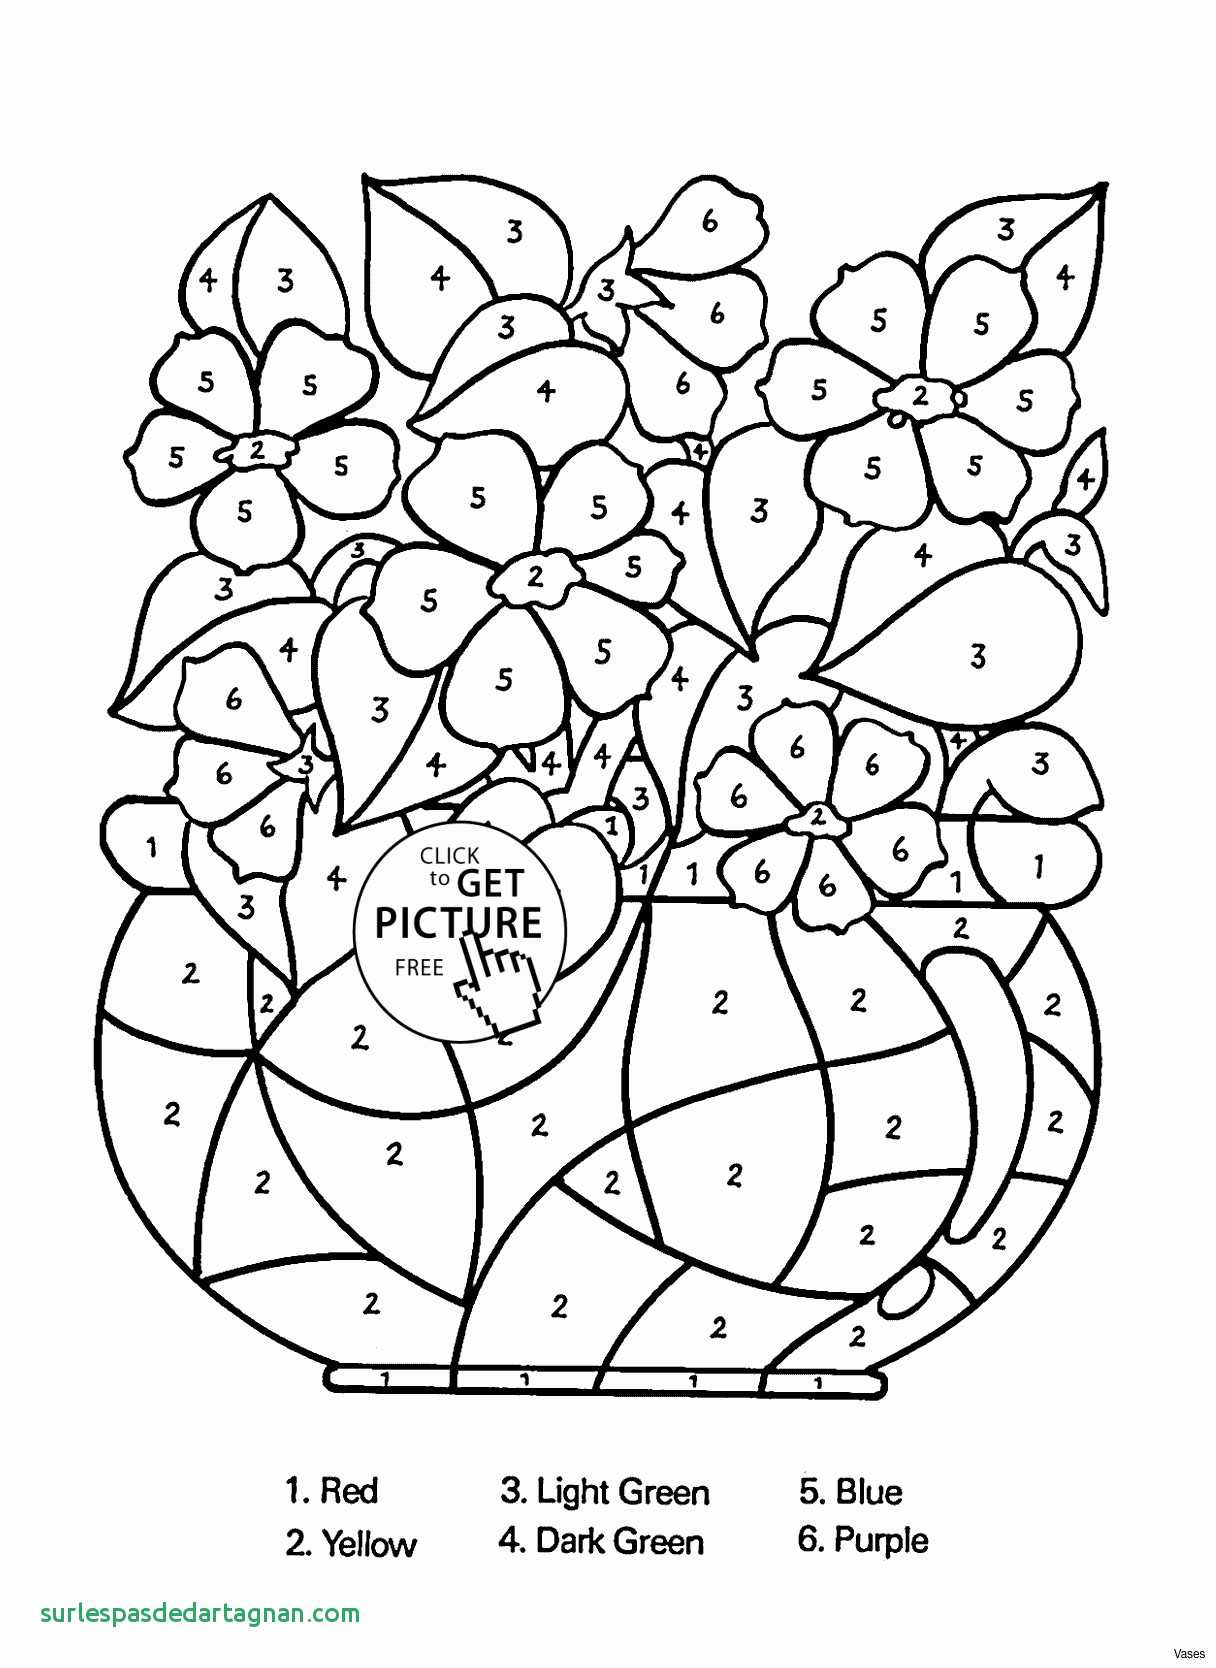 tulip bulb vase of free spring time coloring pages vases flower vase coloring page pertaining to free spring time coloring pages vases flower vase coloring page pages flowers in a top i